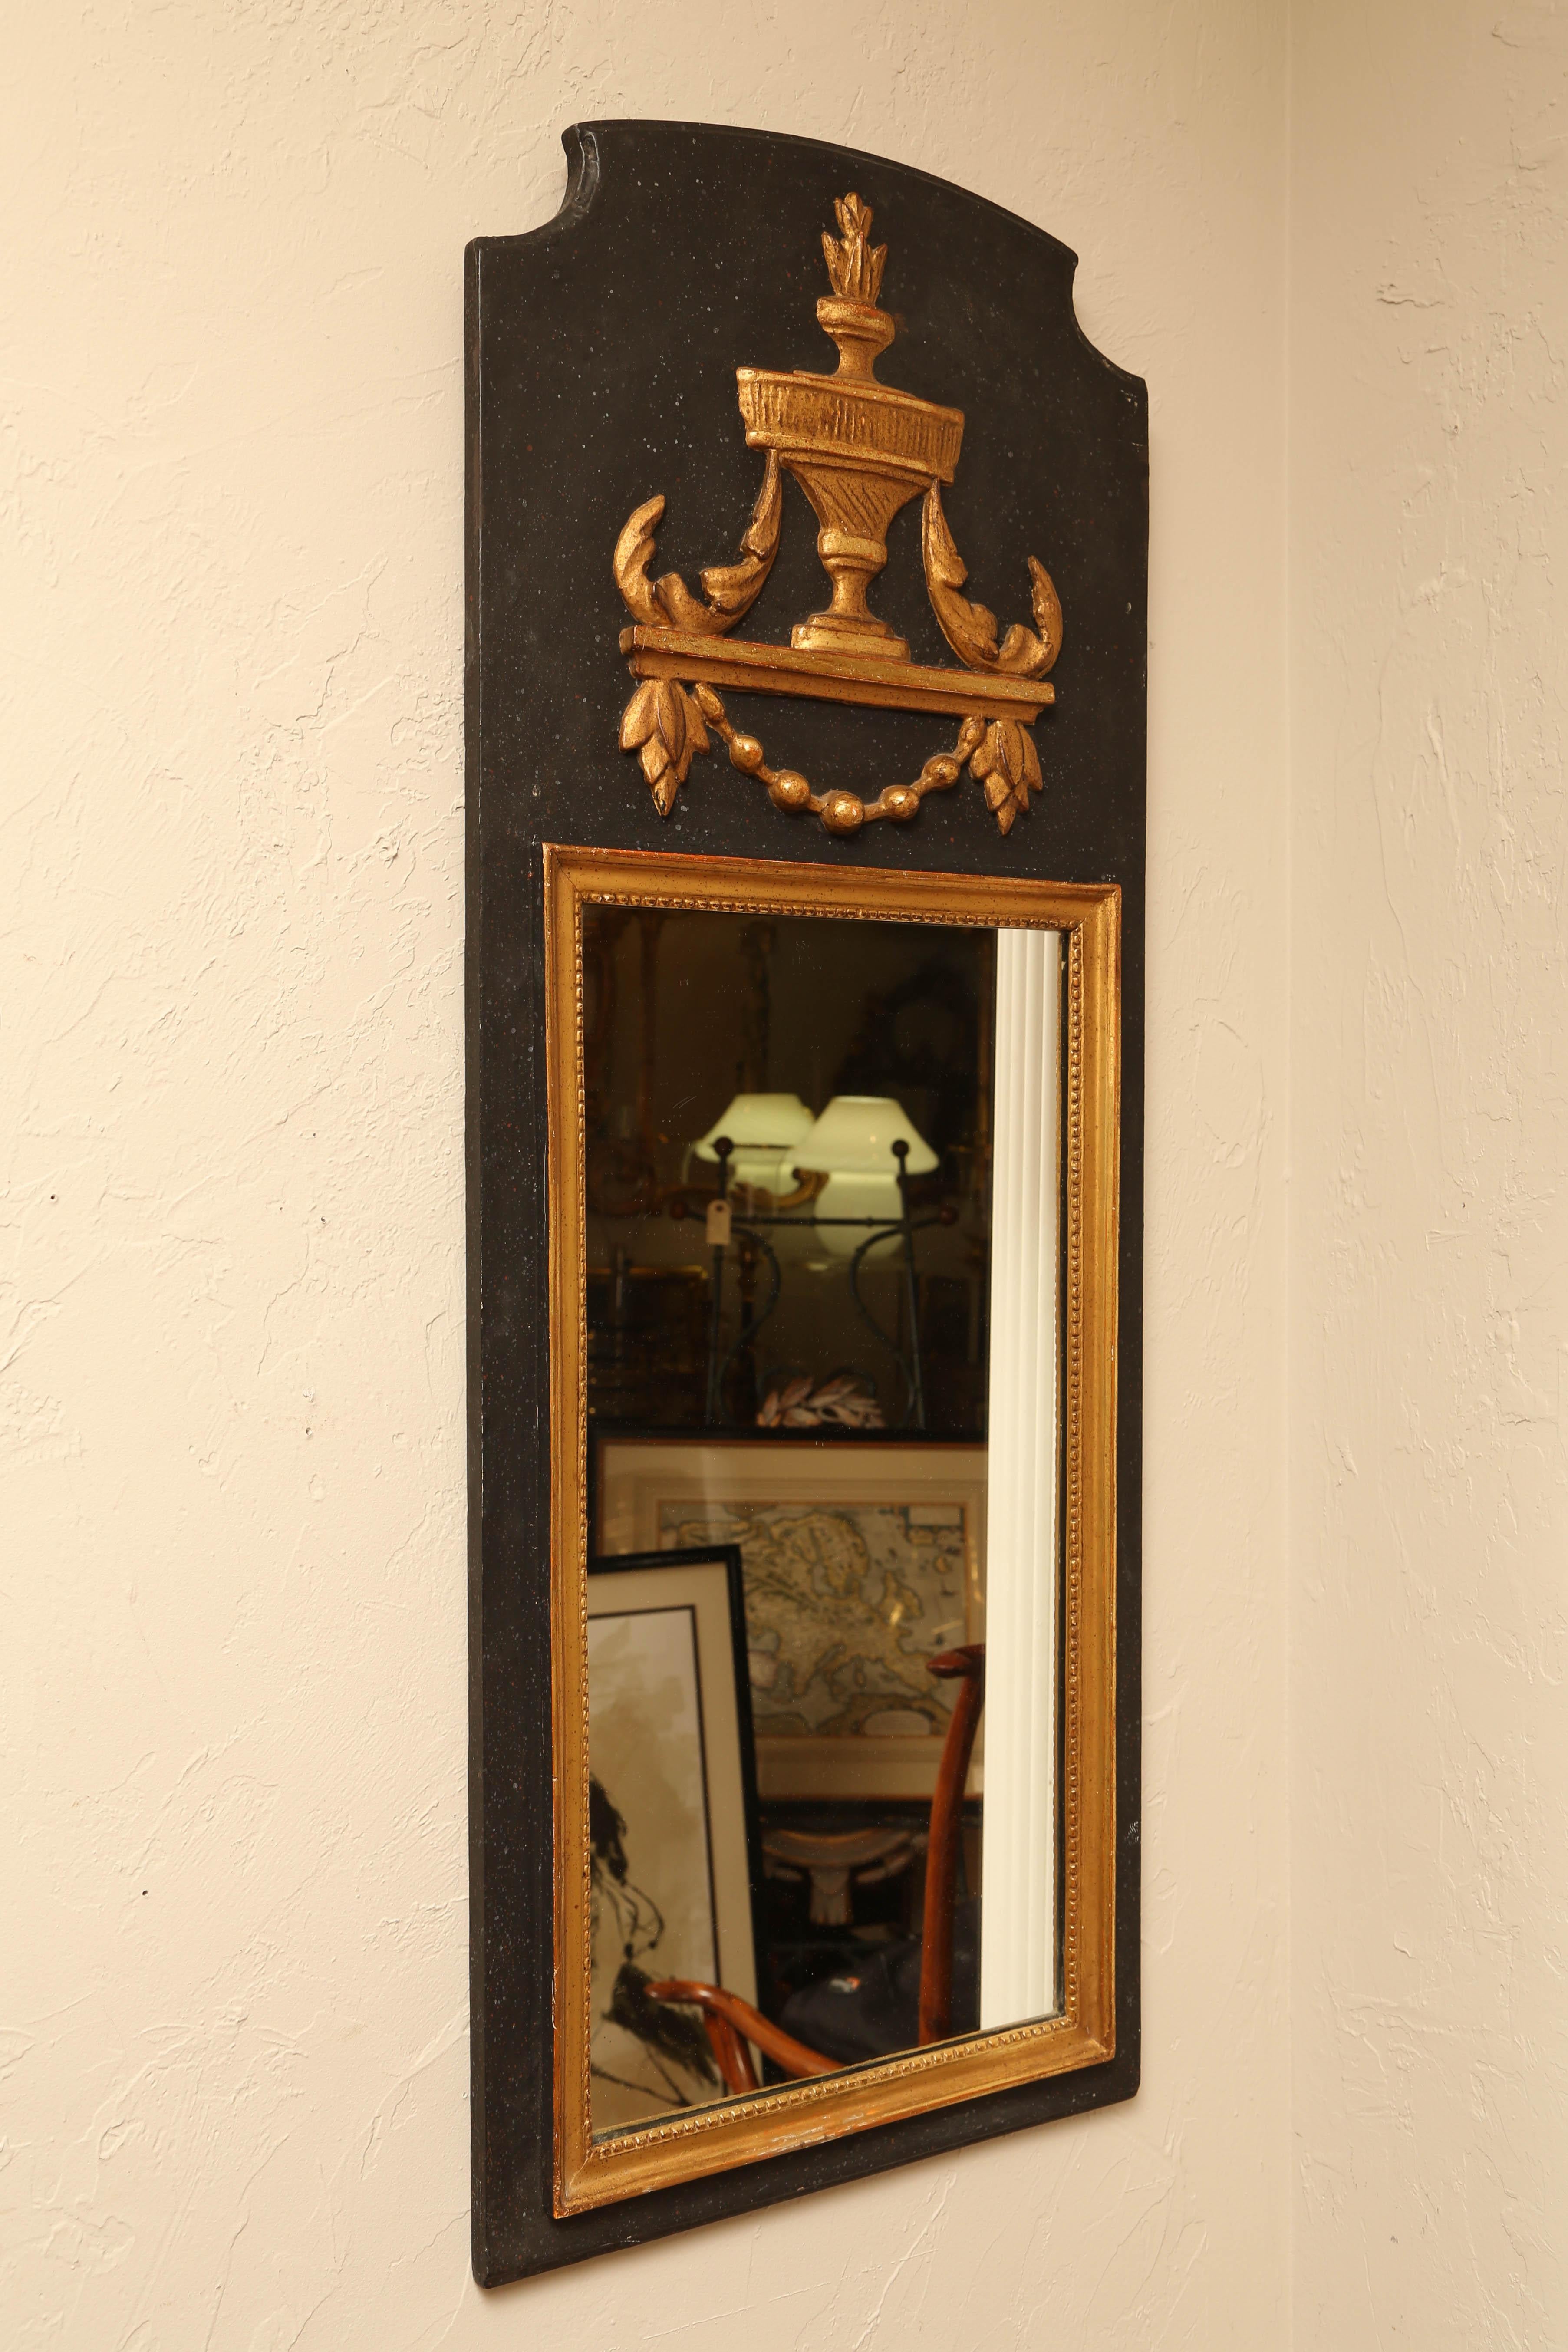 Painted and gilded neoclassical style mirror with striking embellishments.